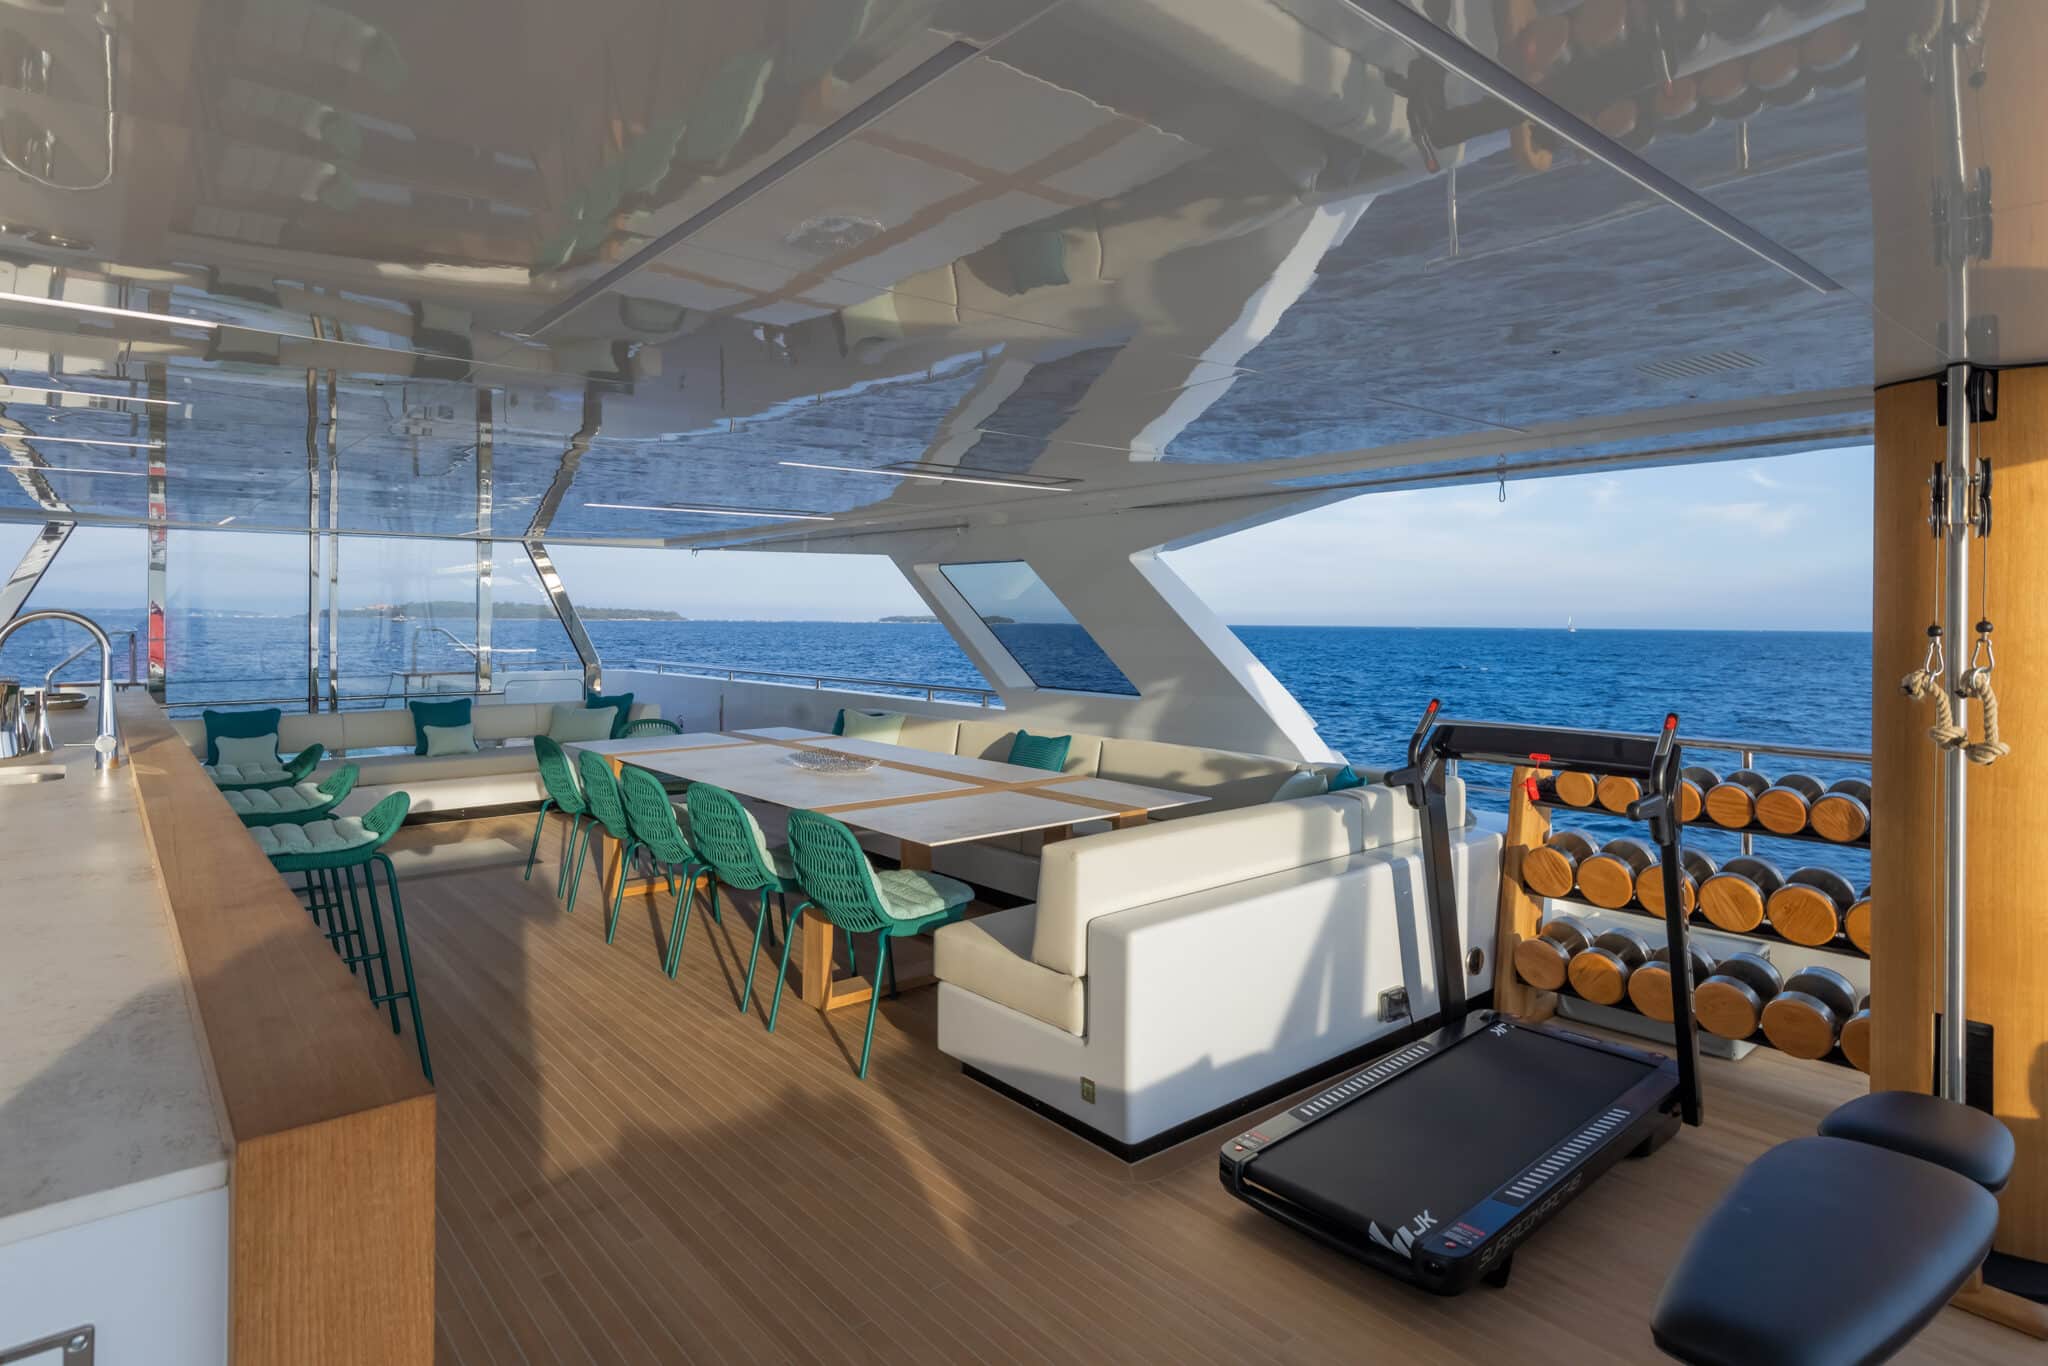 Emocean by Rosetti Super Yacht  - RSY 38M EXP EMOCEAN Sundeck 01 scaled 227